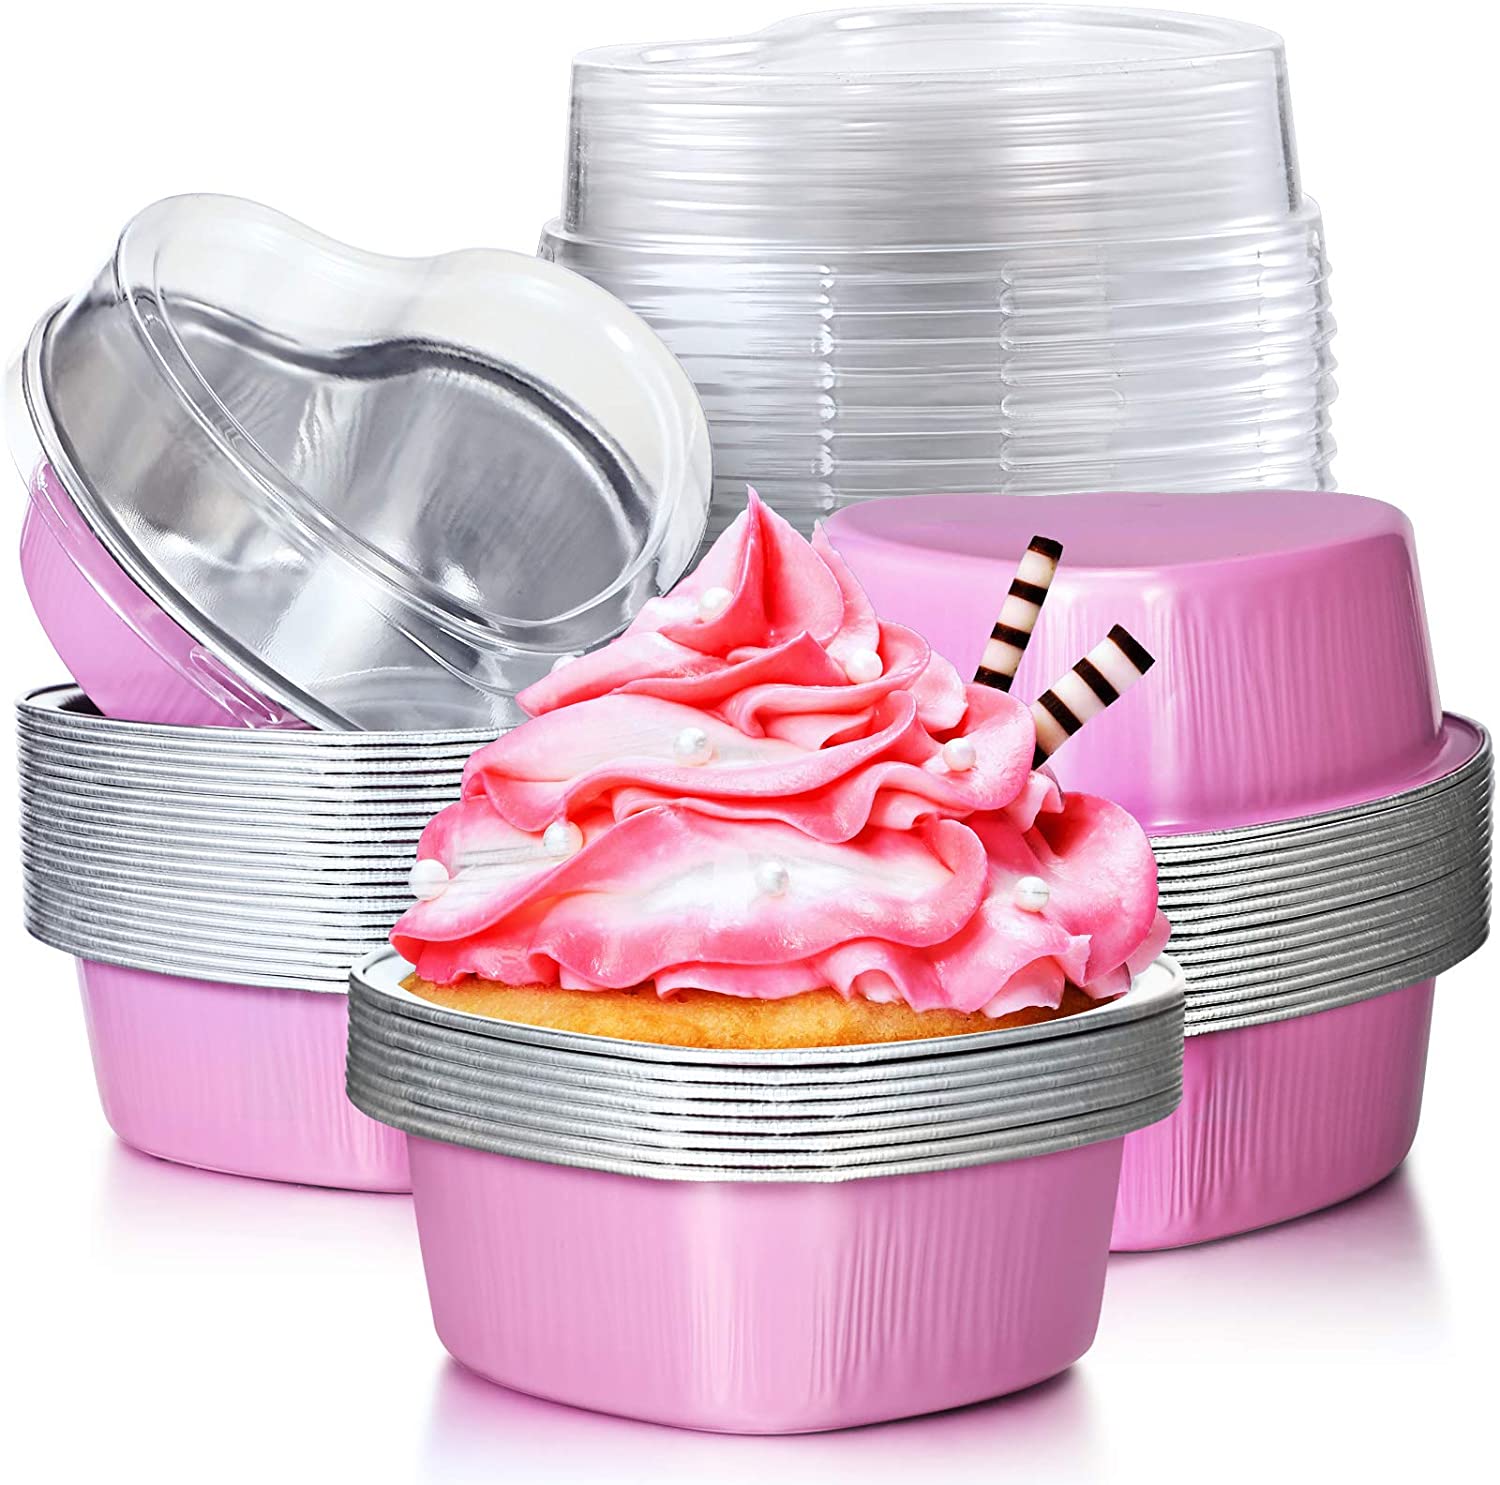 Aluminum Foil Cake Pan Heart Shaped Cupcake Cup with Lids 100 ml/ 3.4 Ounces Disposable Mini Cupcake Cup Flan Baking Cups for Va: pink